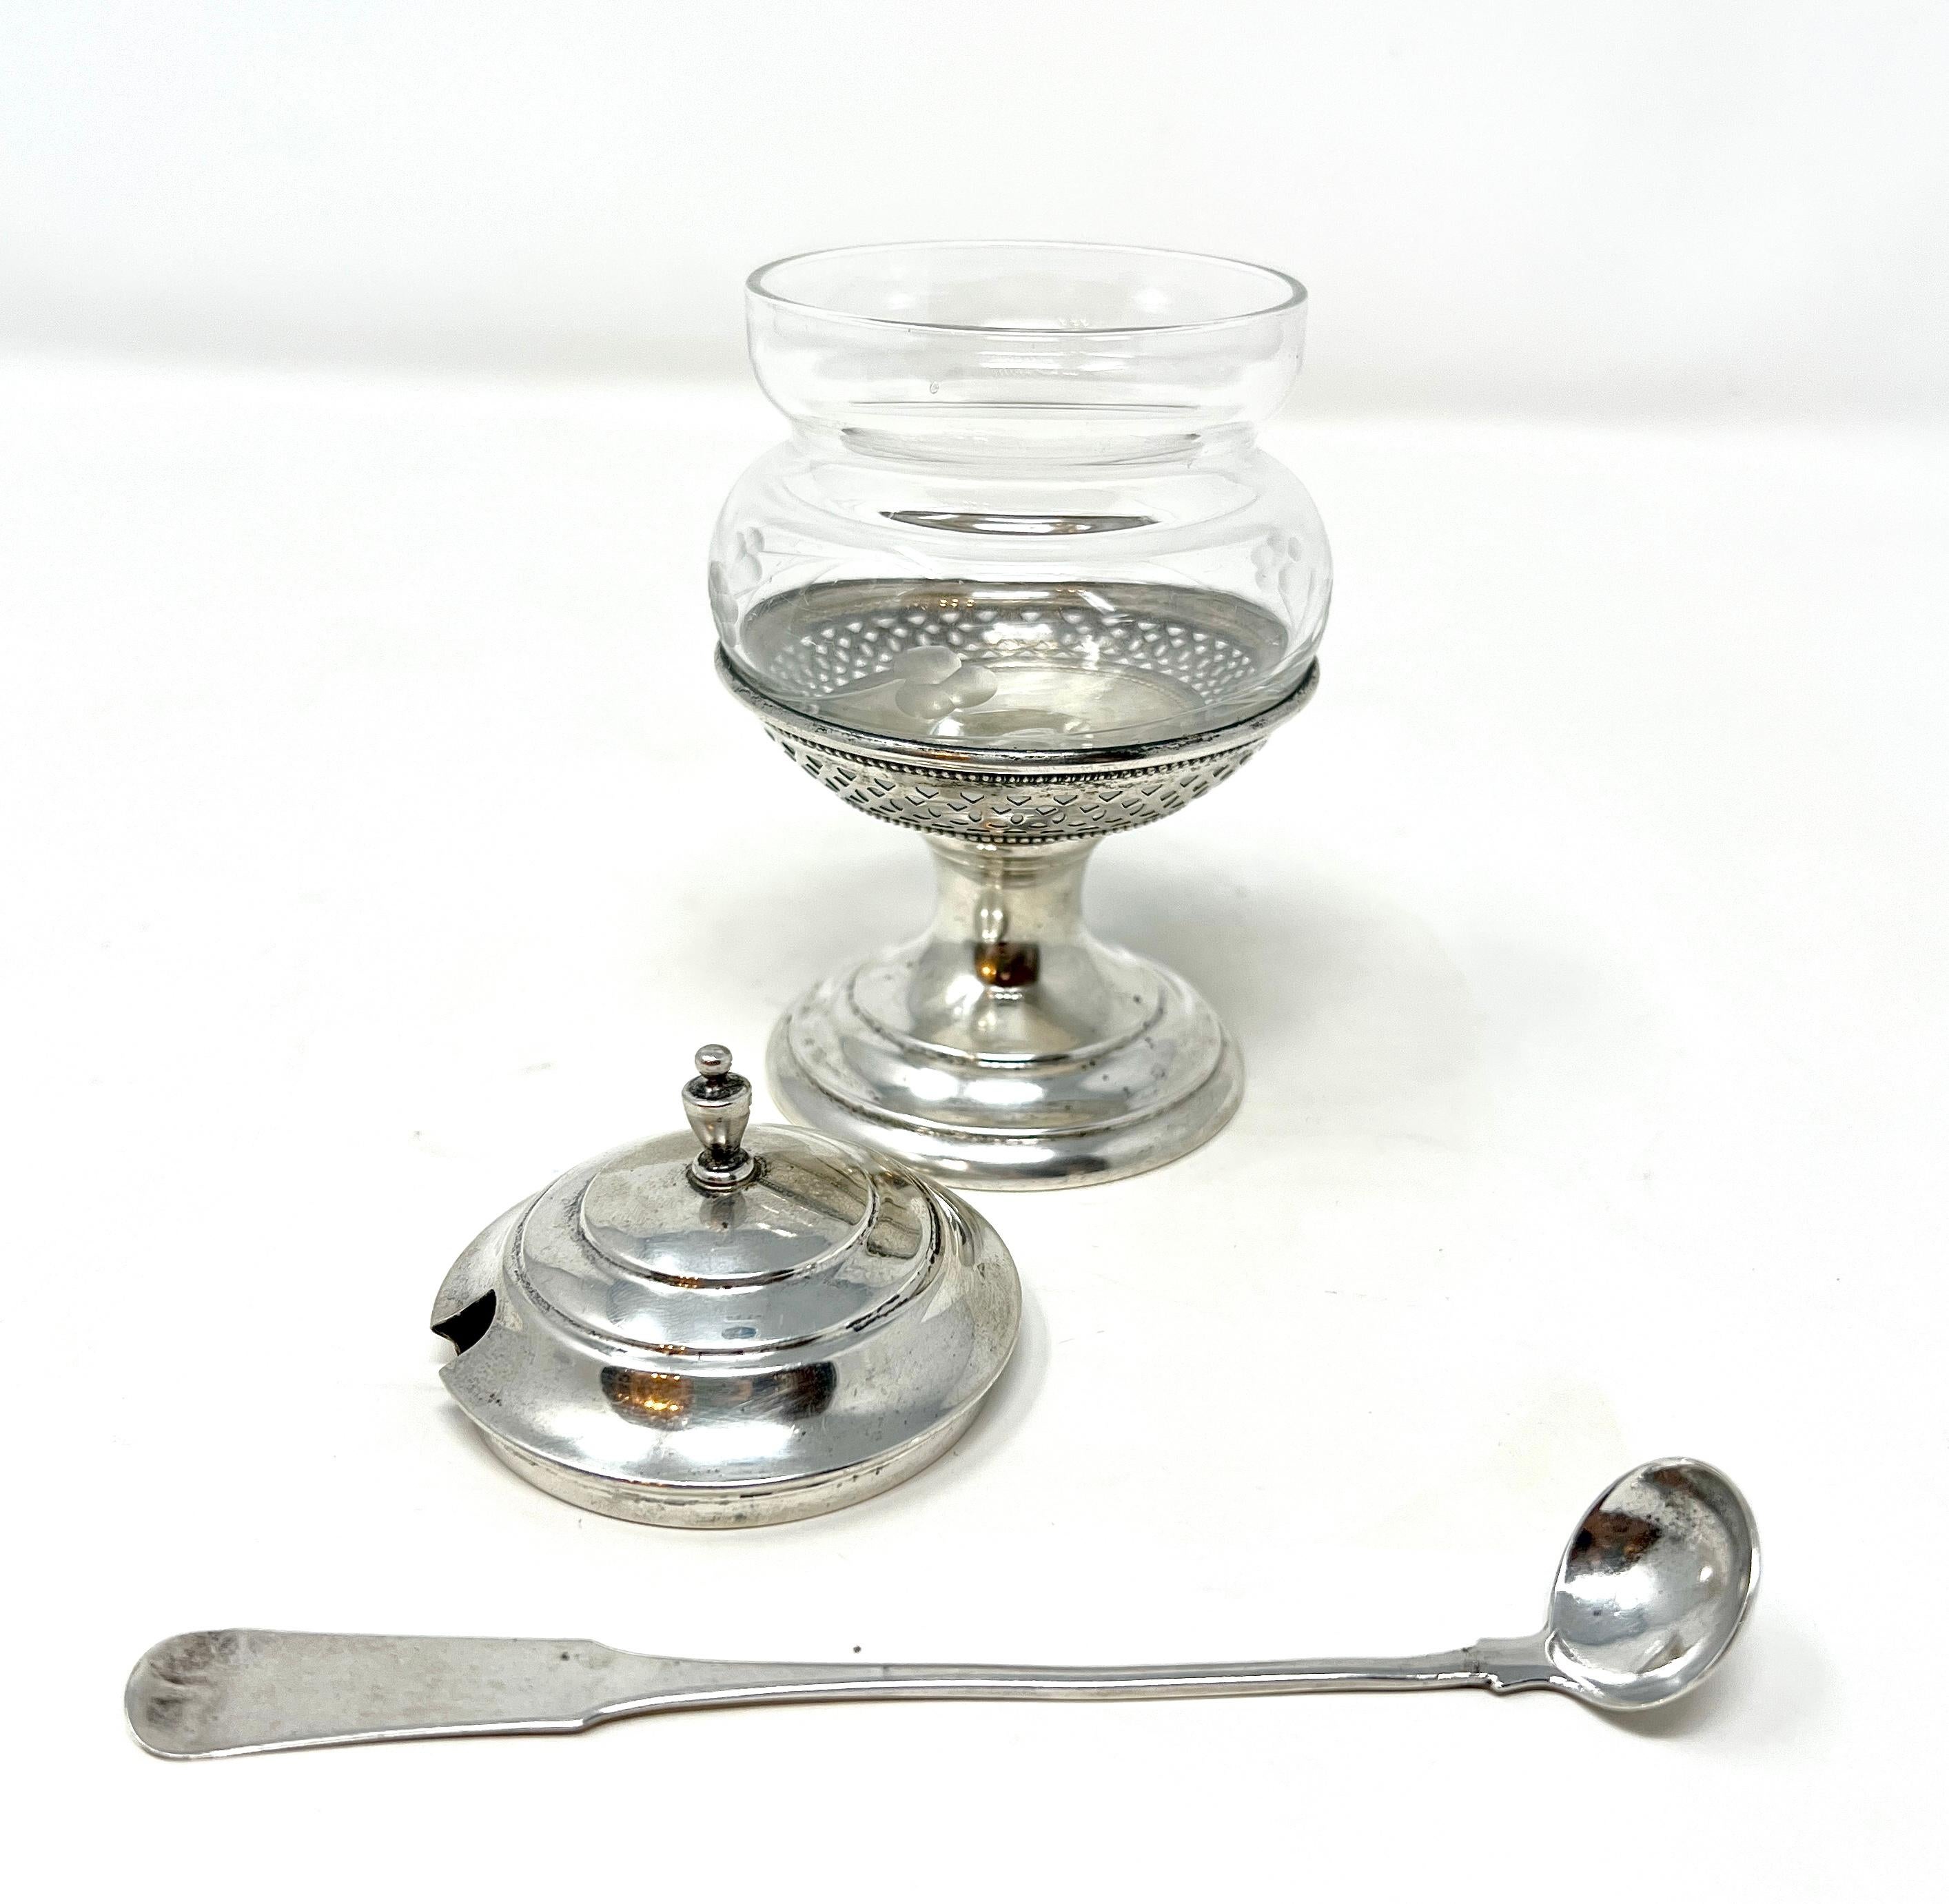 Antique American Sterling Silver & Crystal Mustard Pot with Spoon, Circa 1890-1900.
